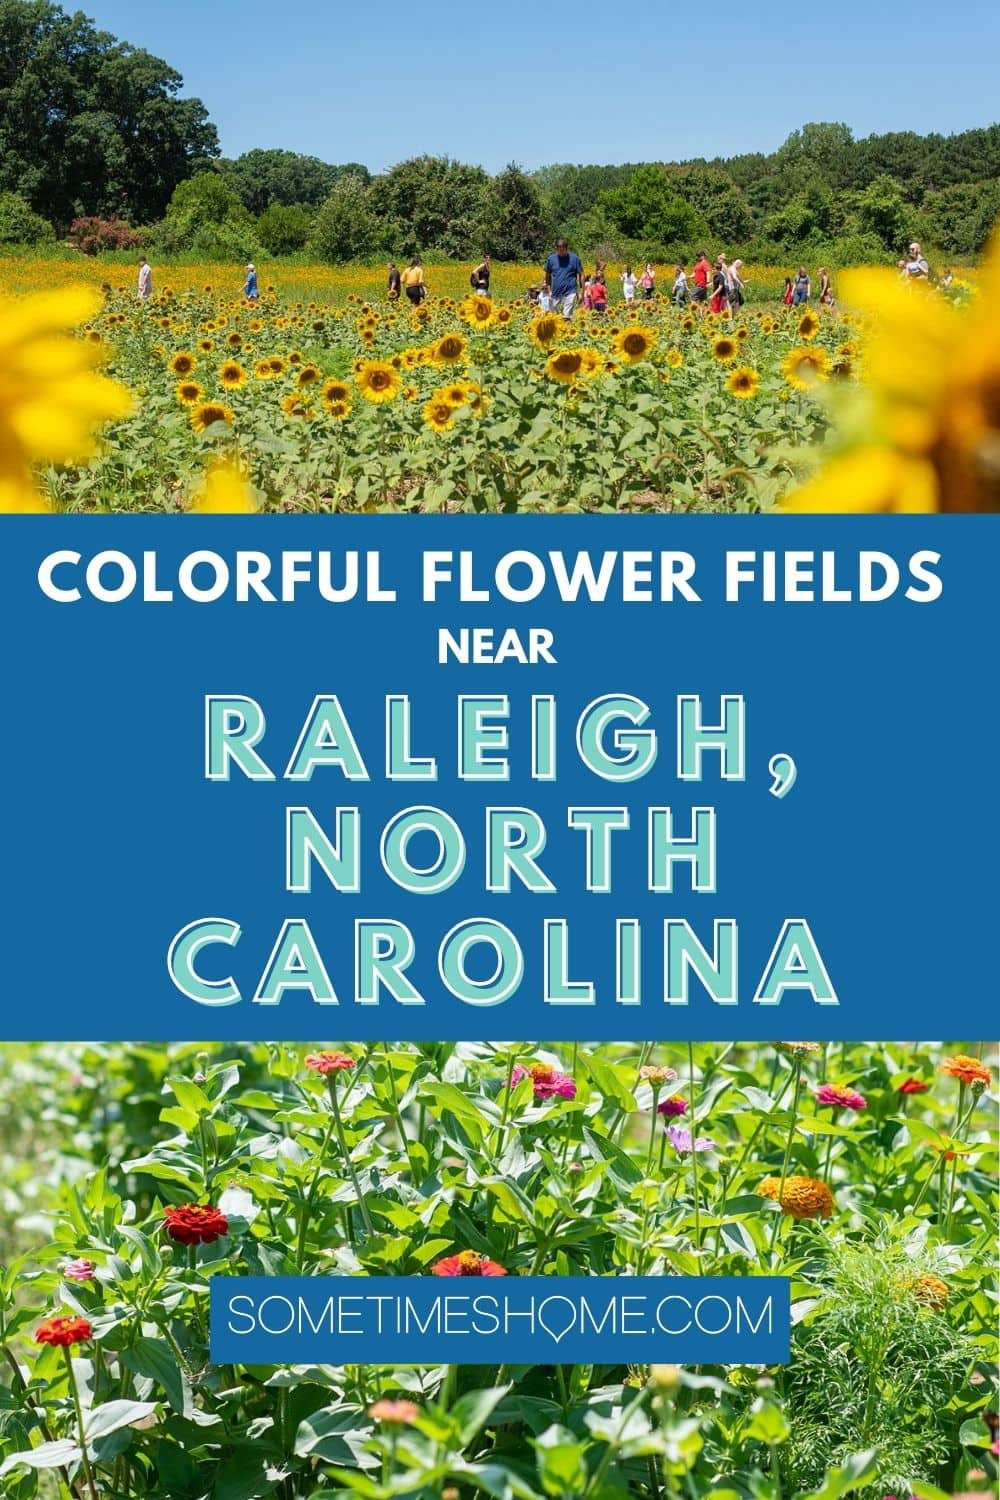 Colorful flower fields near Raleigh, NC with images of sunflower fields and zinnia fields.